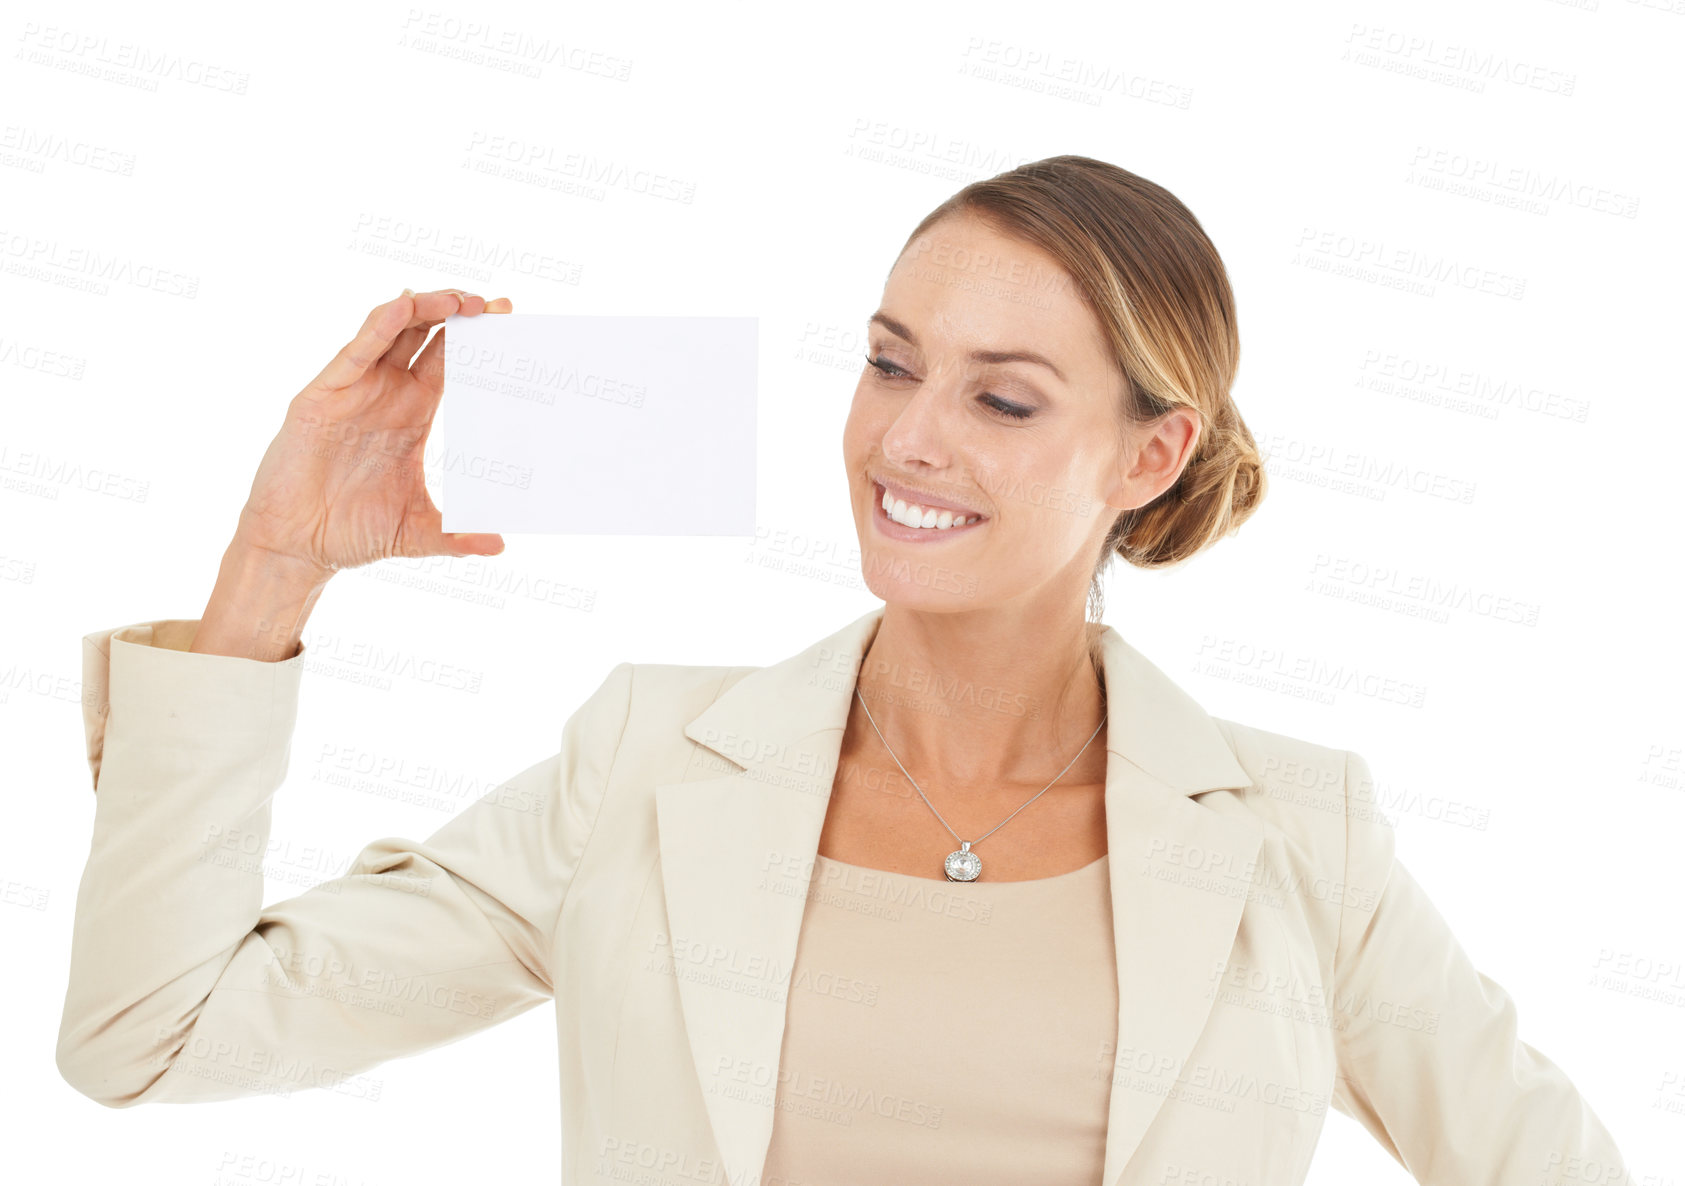 Buy stock photo Mockup, smile or happy woman with business card for a sale, promotion offer or logo advertising deal. Show, plain bulletin board or entrepreneur with blank signage space in studio on white background